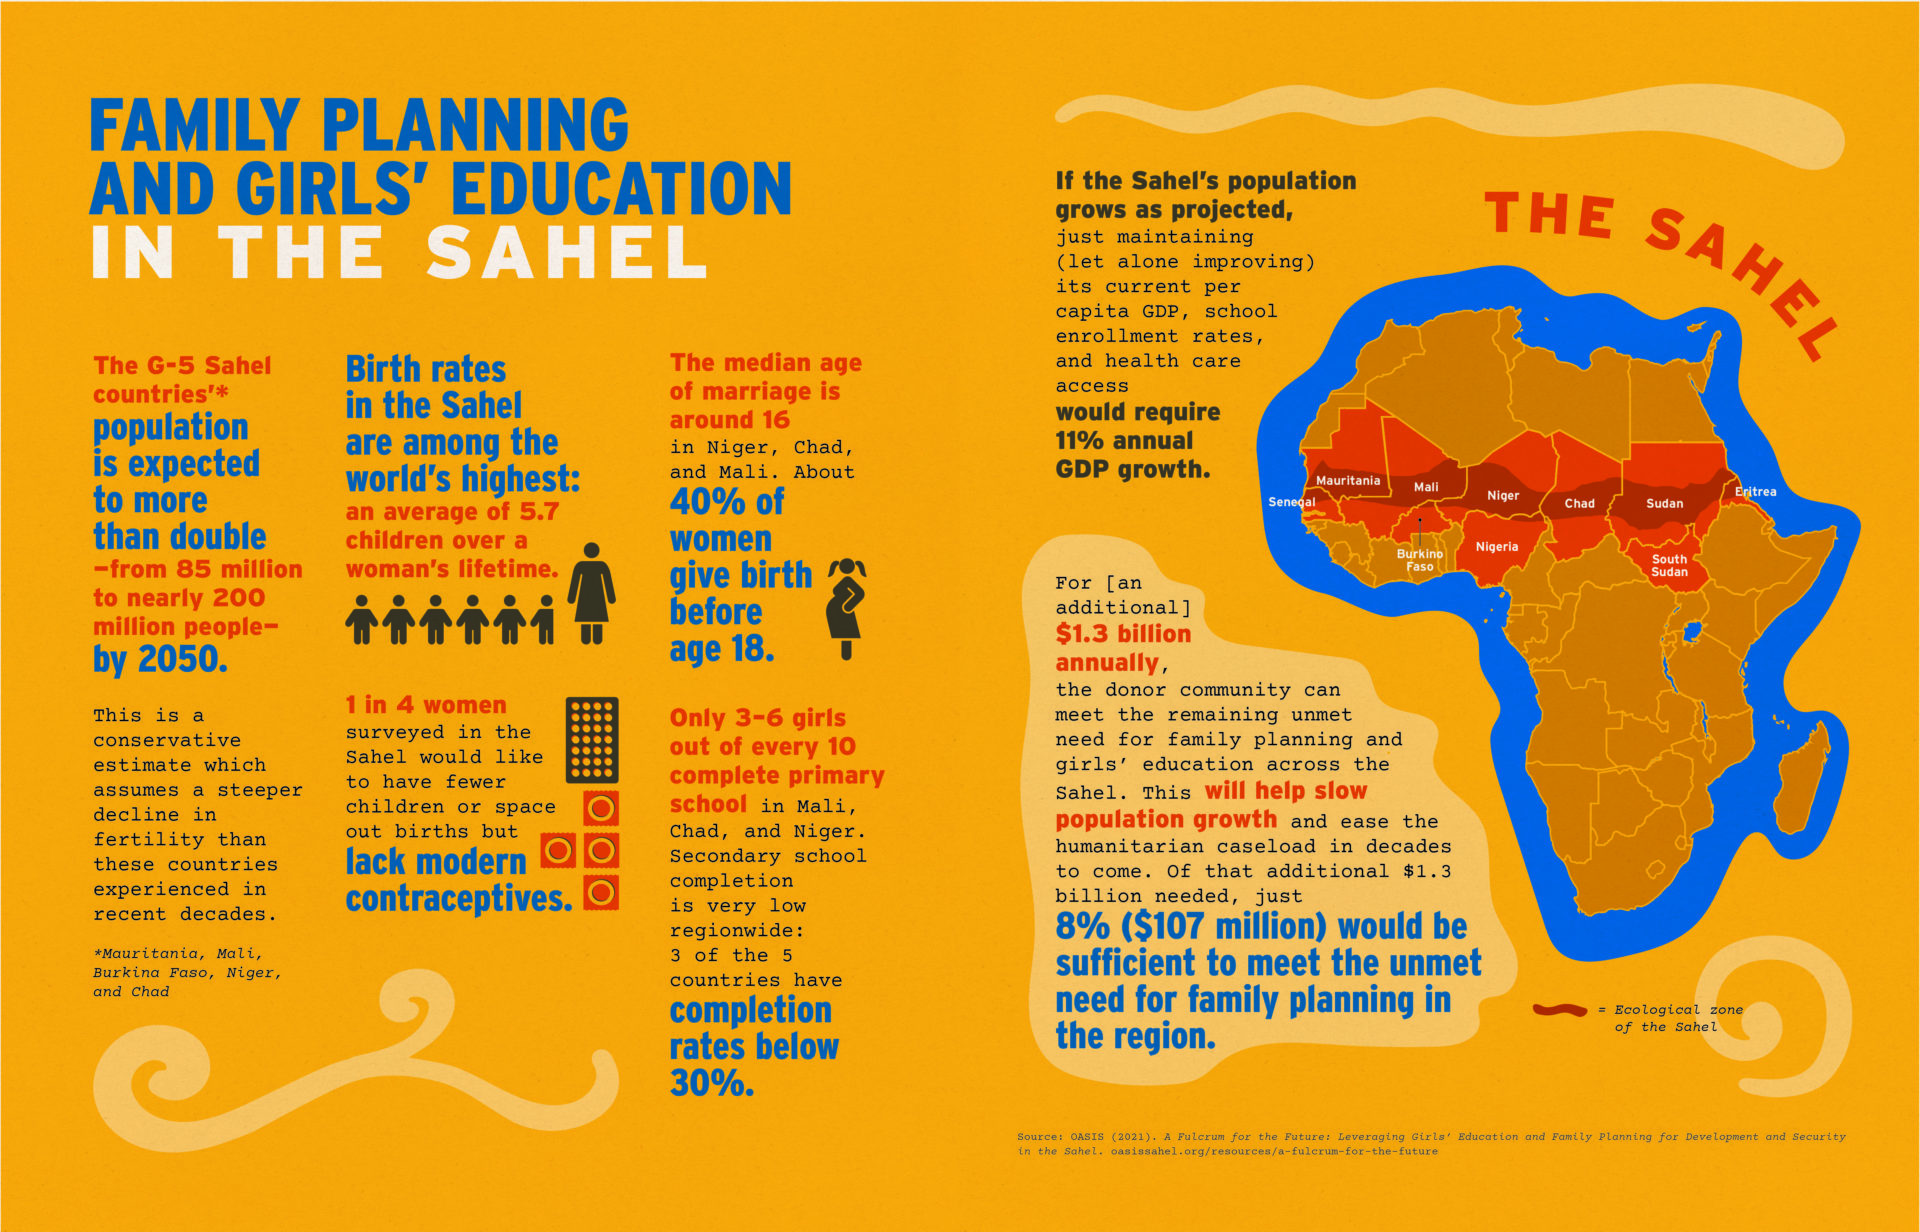 infographic about family planning and girls' education in the Sahel region of Africa